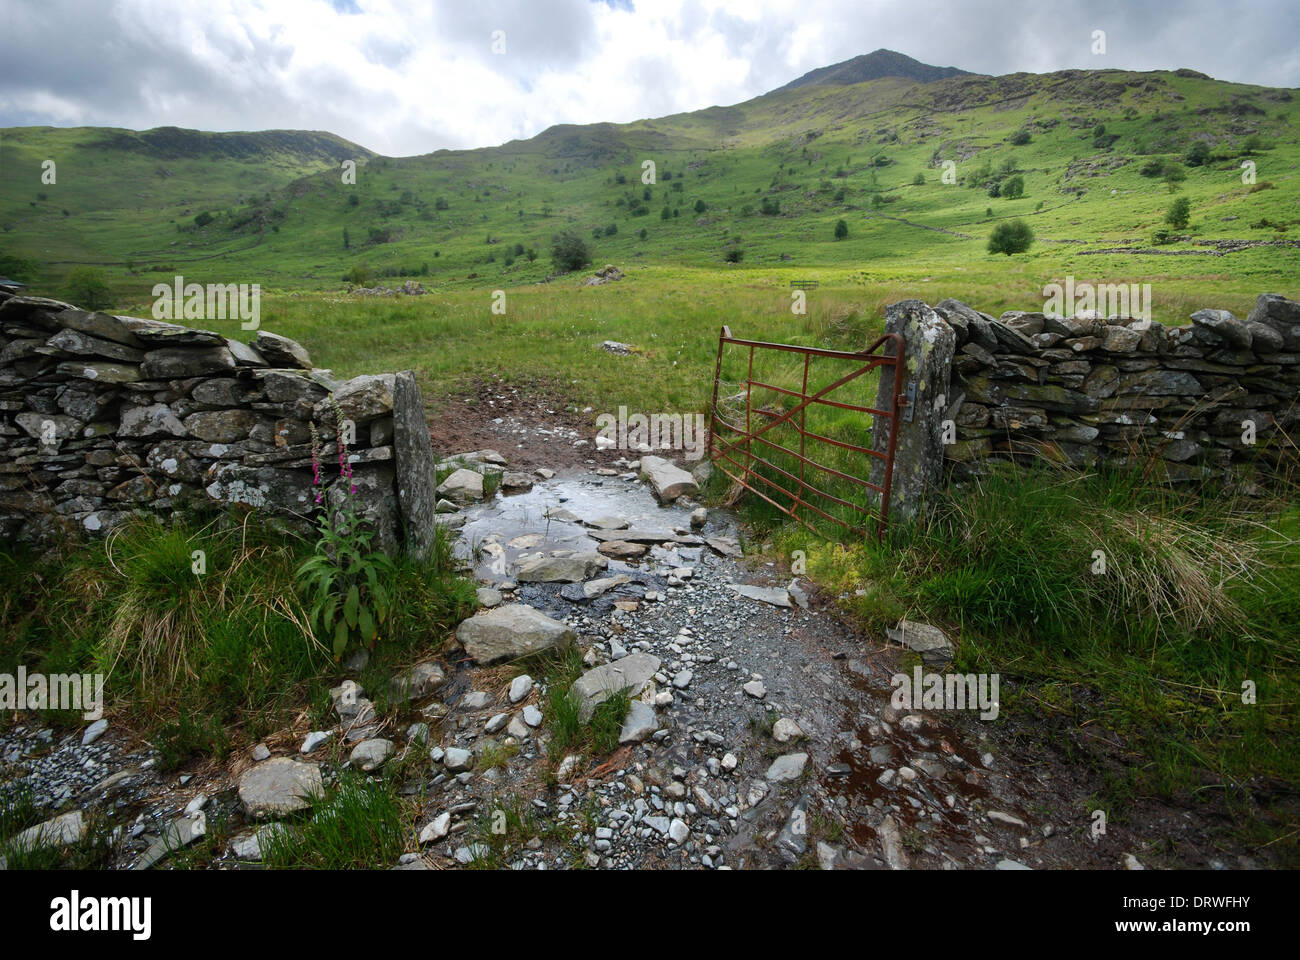 Open gate to a field in the Snowdonia National Park, North Wales Stock Photo